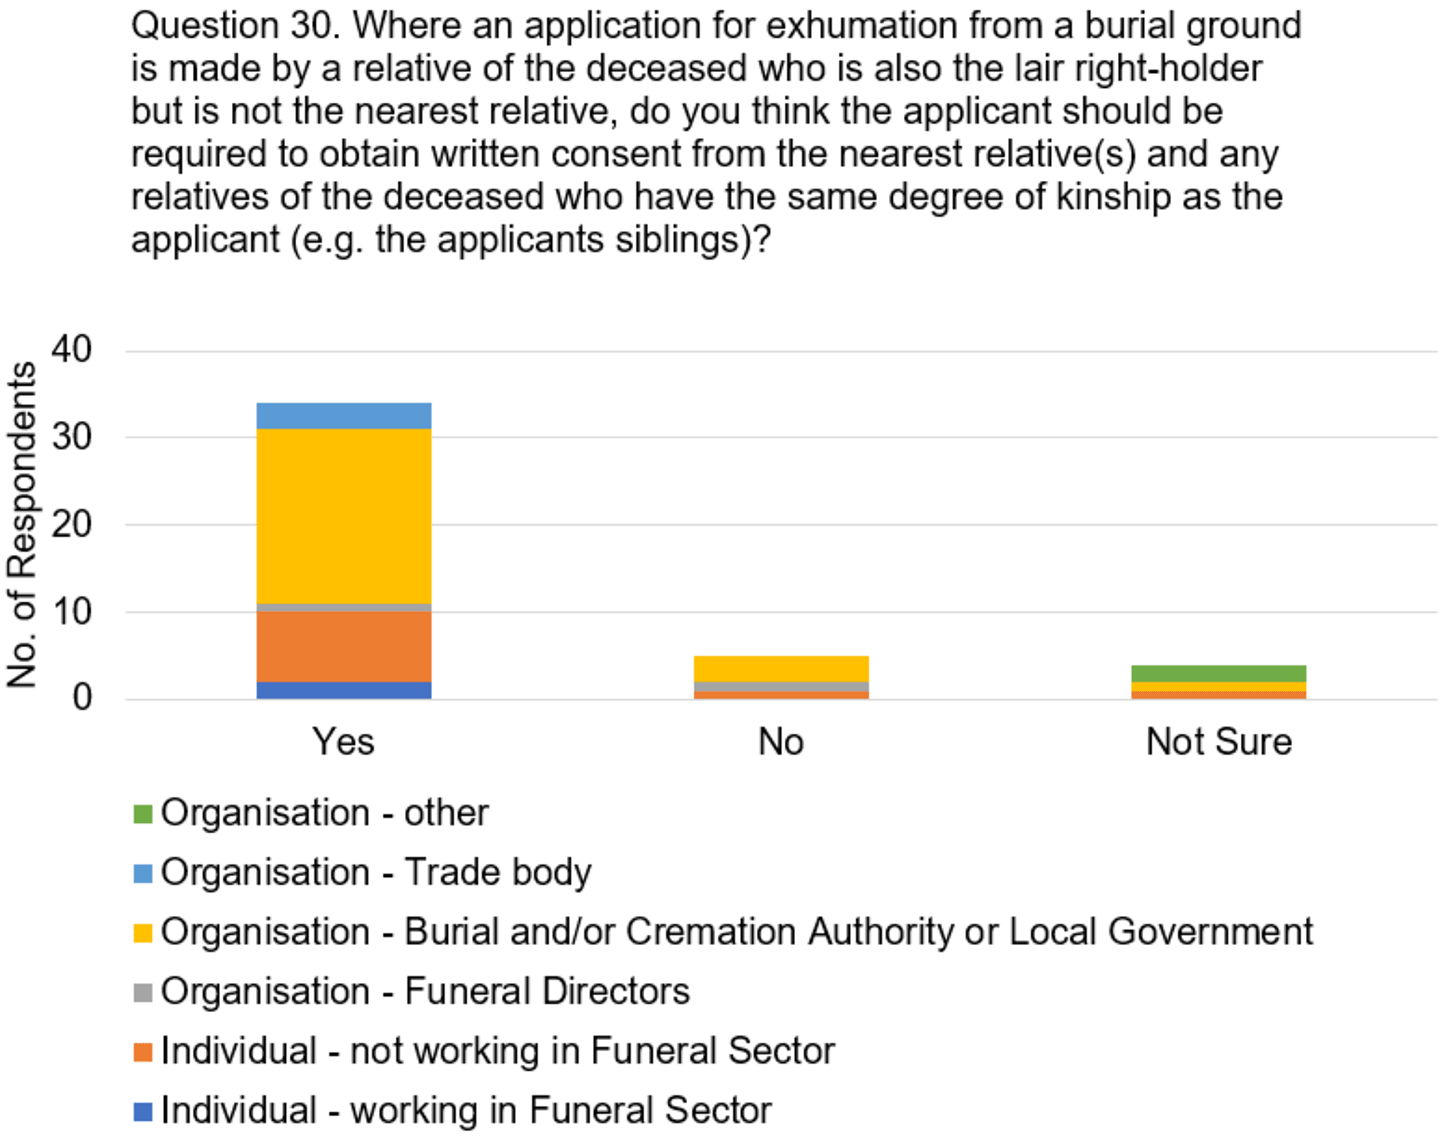 The graph visually presents the data from table 20, focussing on the responses to the question, "Where an application for exhumation from a burial ground is made by a relative of the deceased who is also the lair right-holder but is not the nearest relative, do you think the applicant should be required to obtain written consent from the nearest relative(s) and any relatives of the deceased who have the same degree of kinship as the applicant (e.g. the applicants siblings)?"